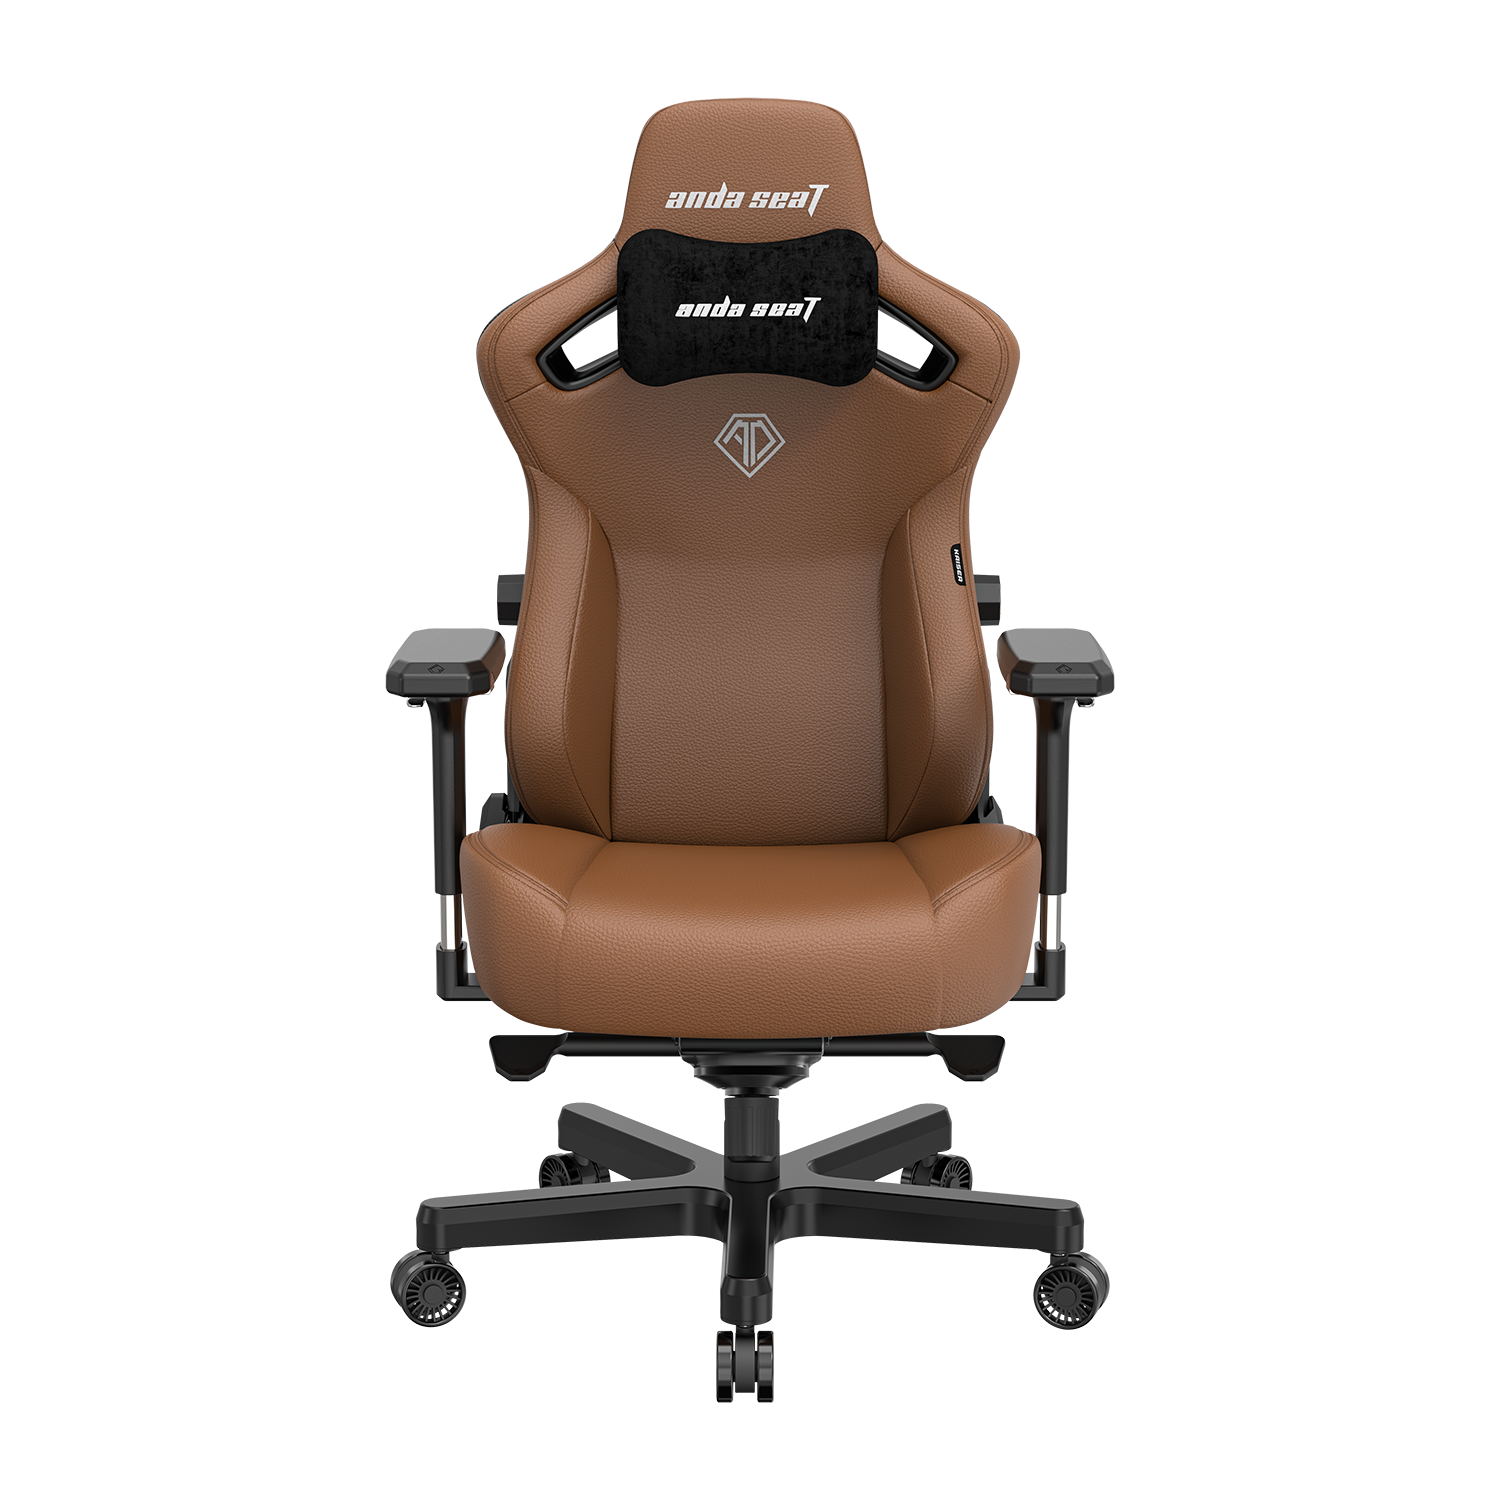 ANDASEAT KAISER 3 L SIZE DURAXTRA LEATHERETTE - BENTLEY BROWN